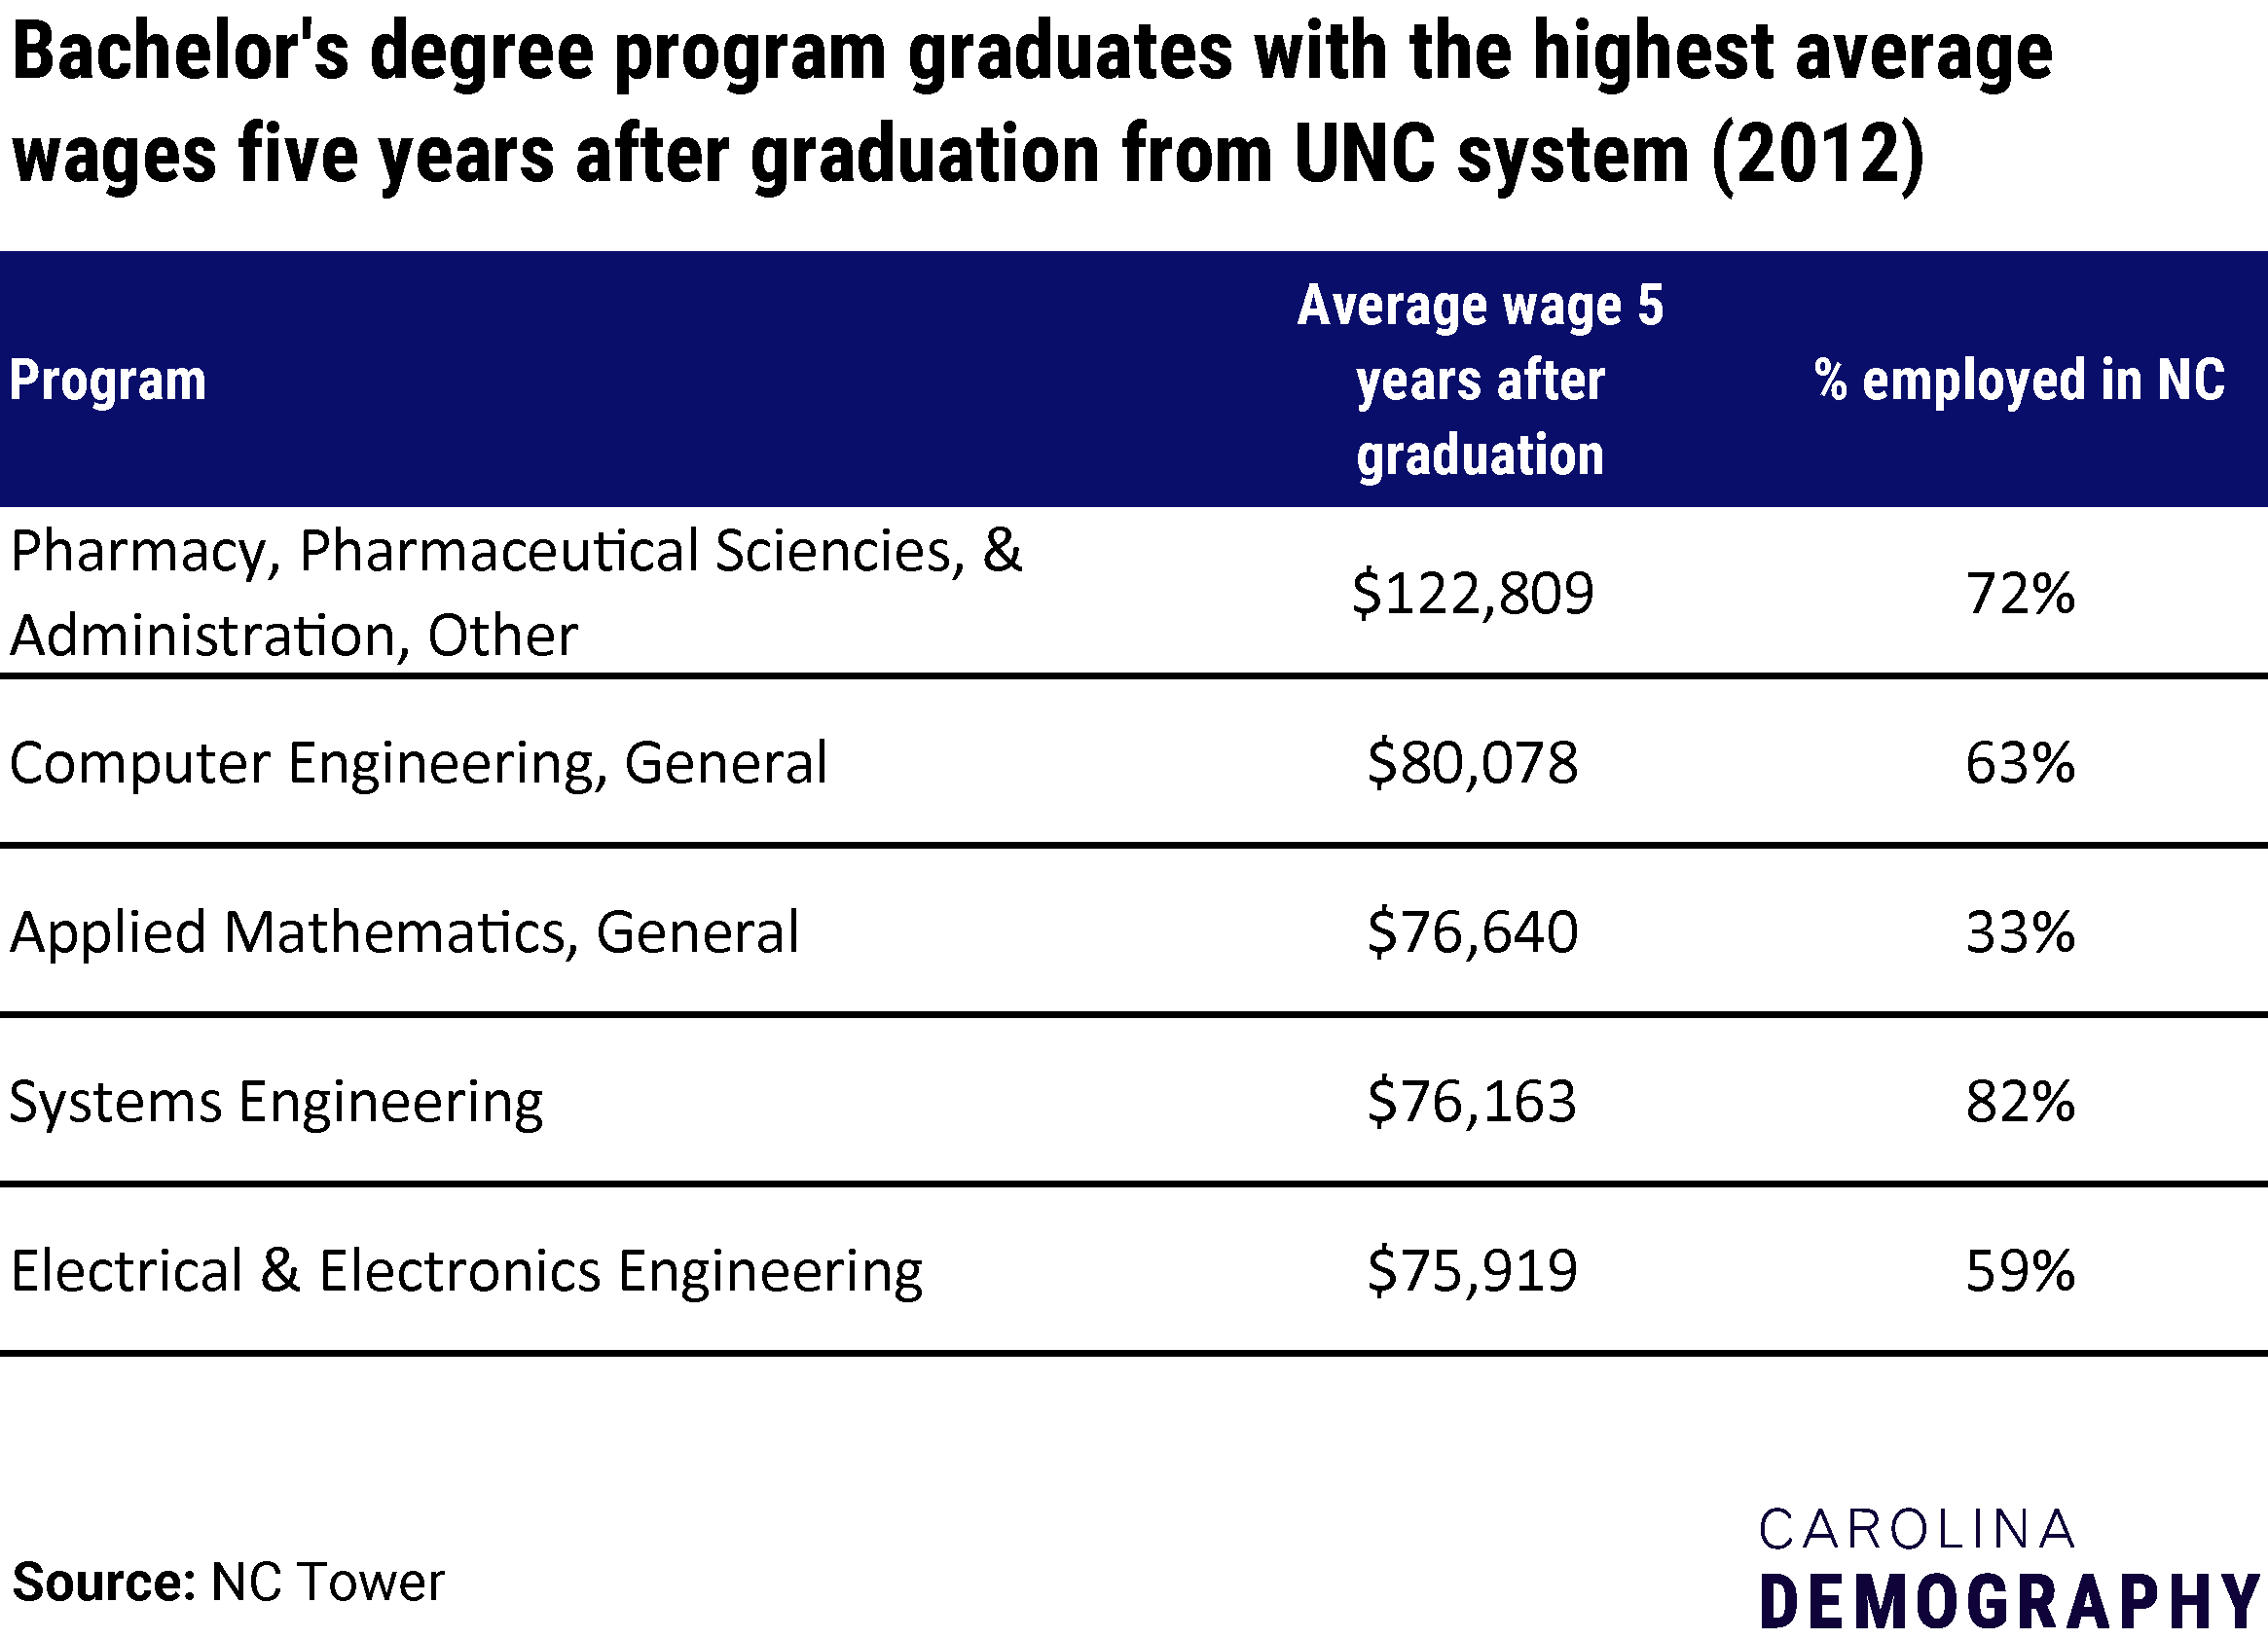 Bachelor's degree program graduates with the highest average wages five years after graduation, UNC system schools (2012)